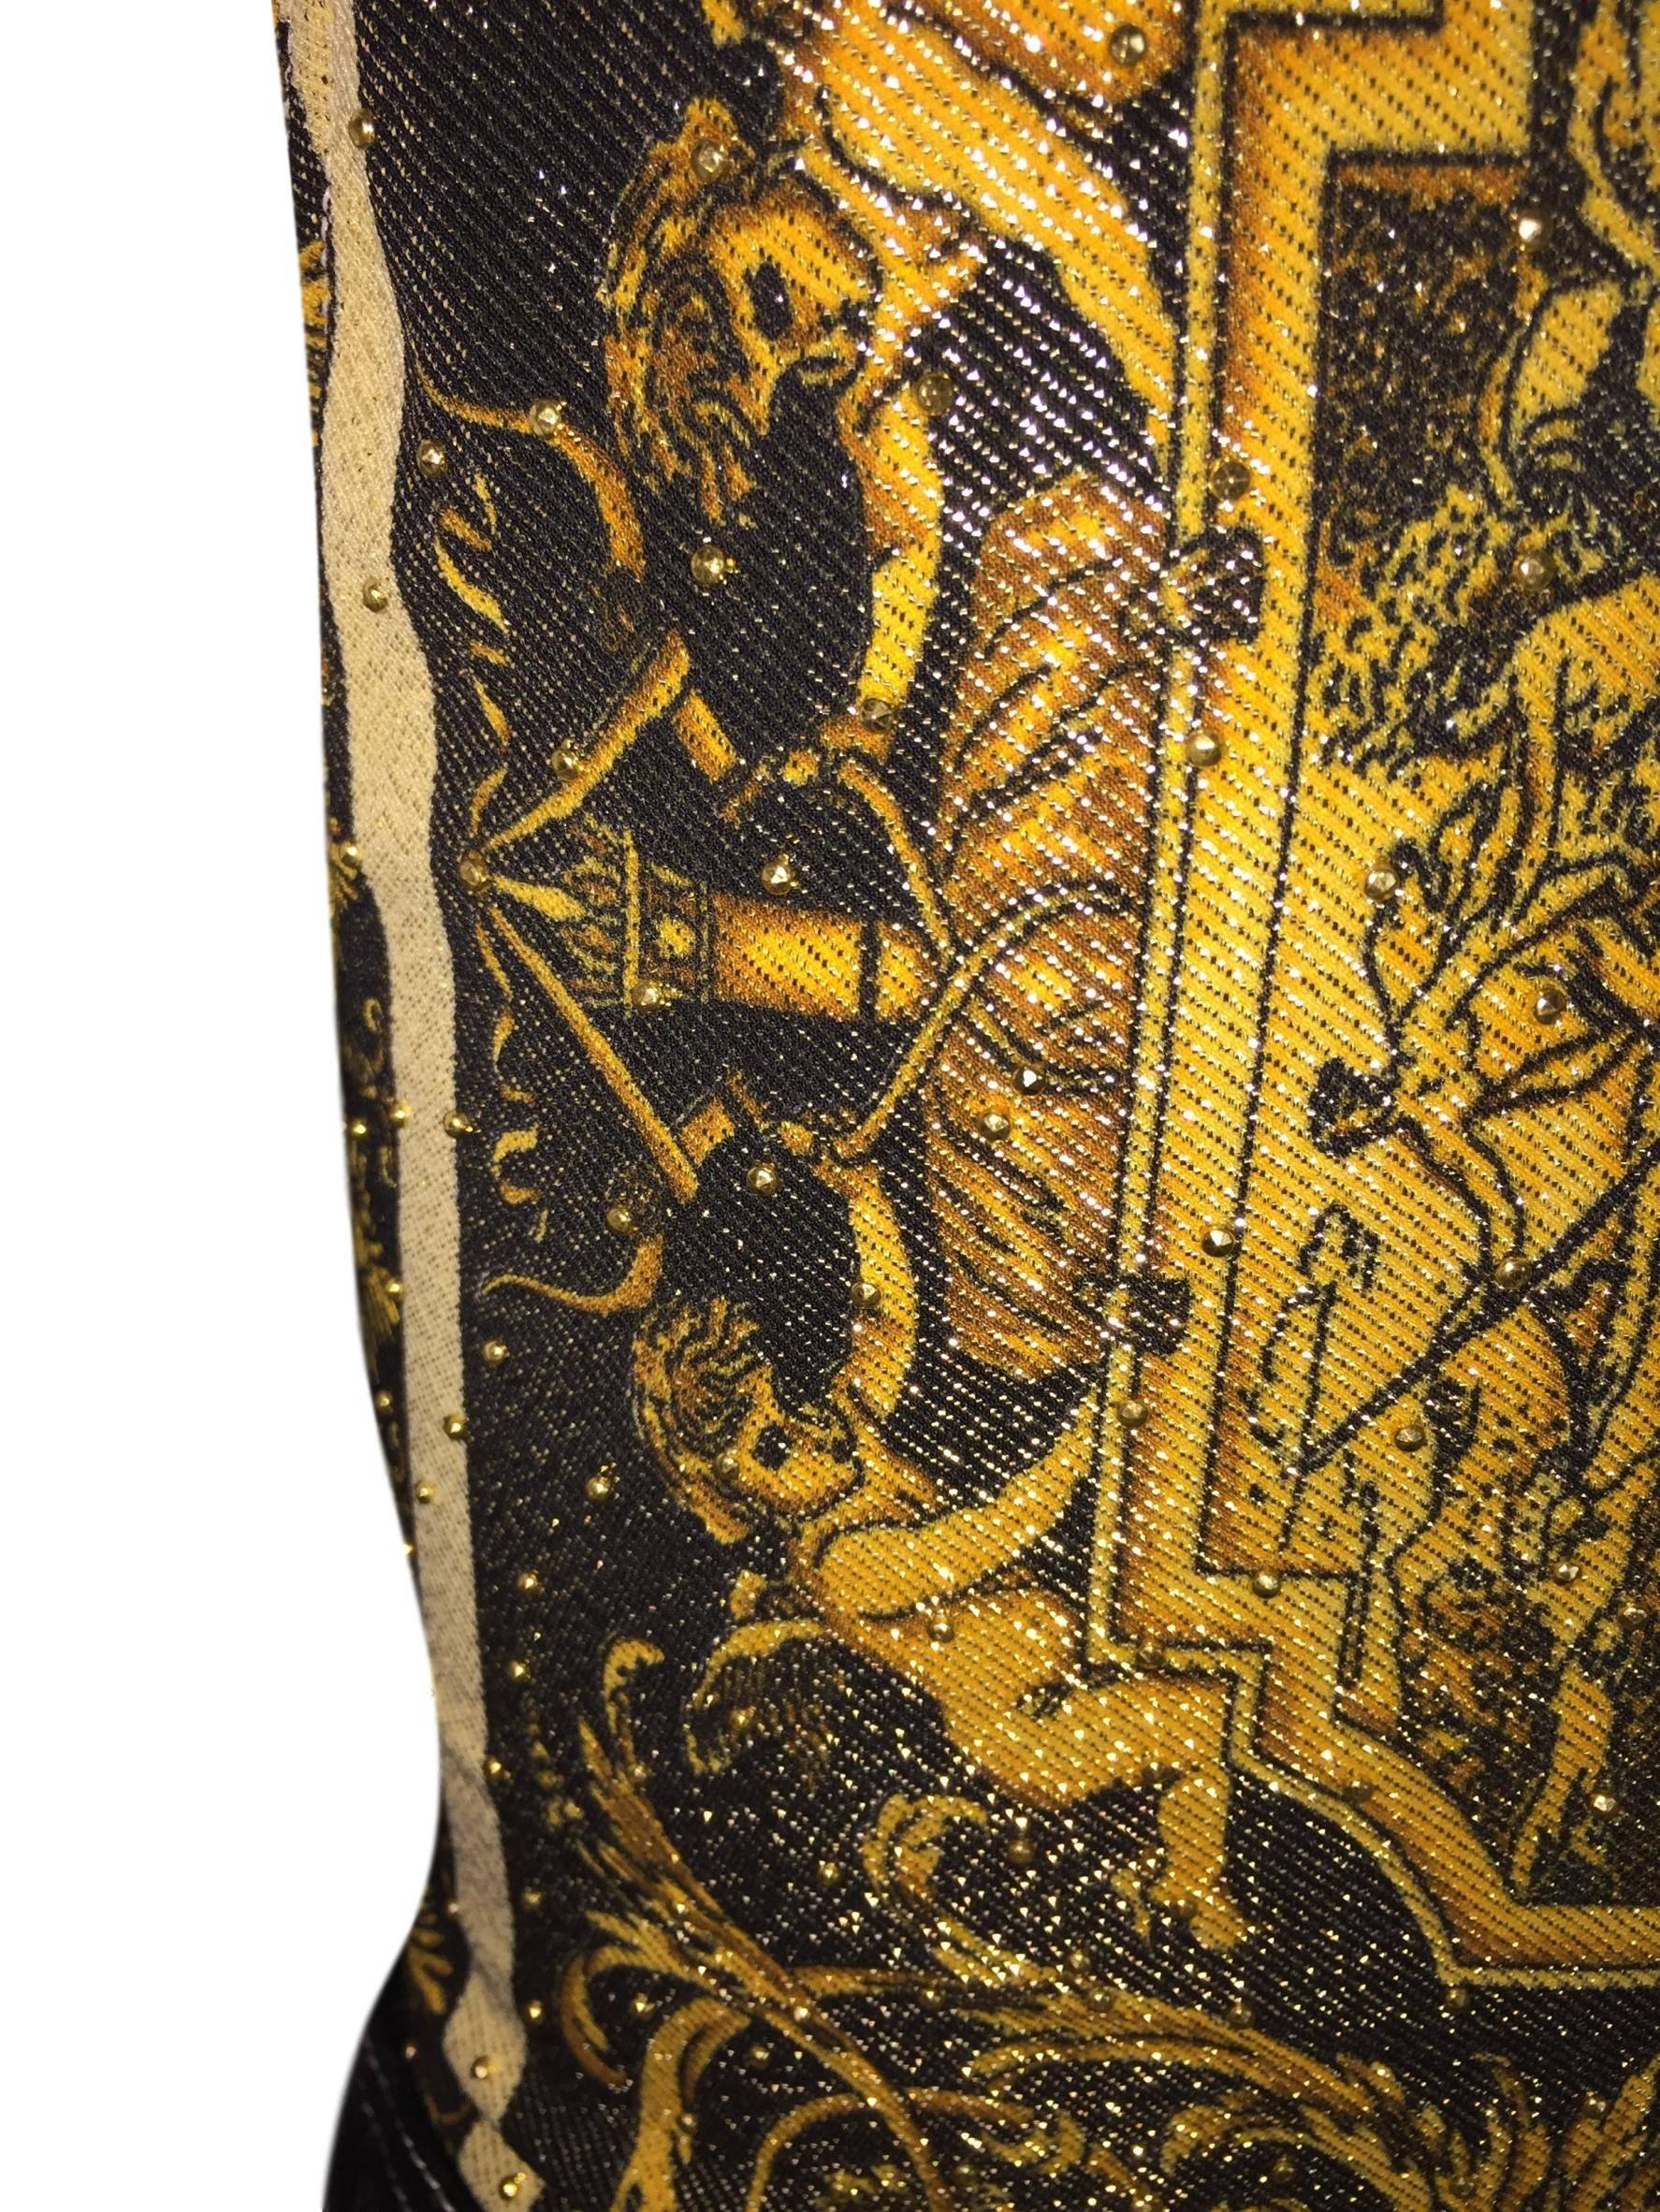 Brown S/S 1992 Gianni Versace Atelier Print Gold Studded Baroque Top